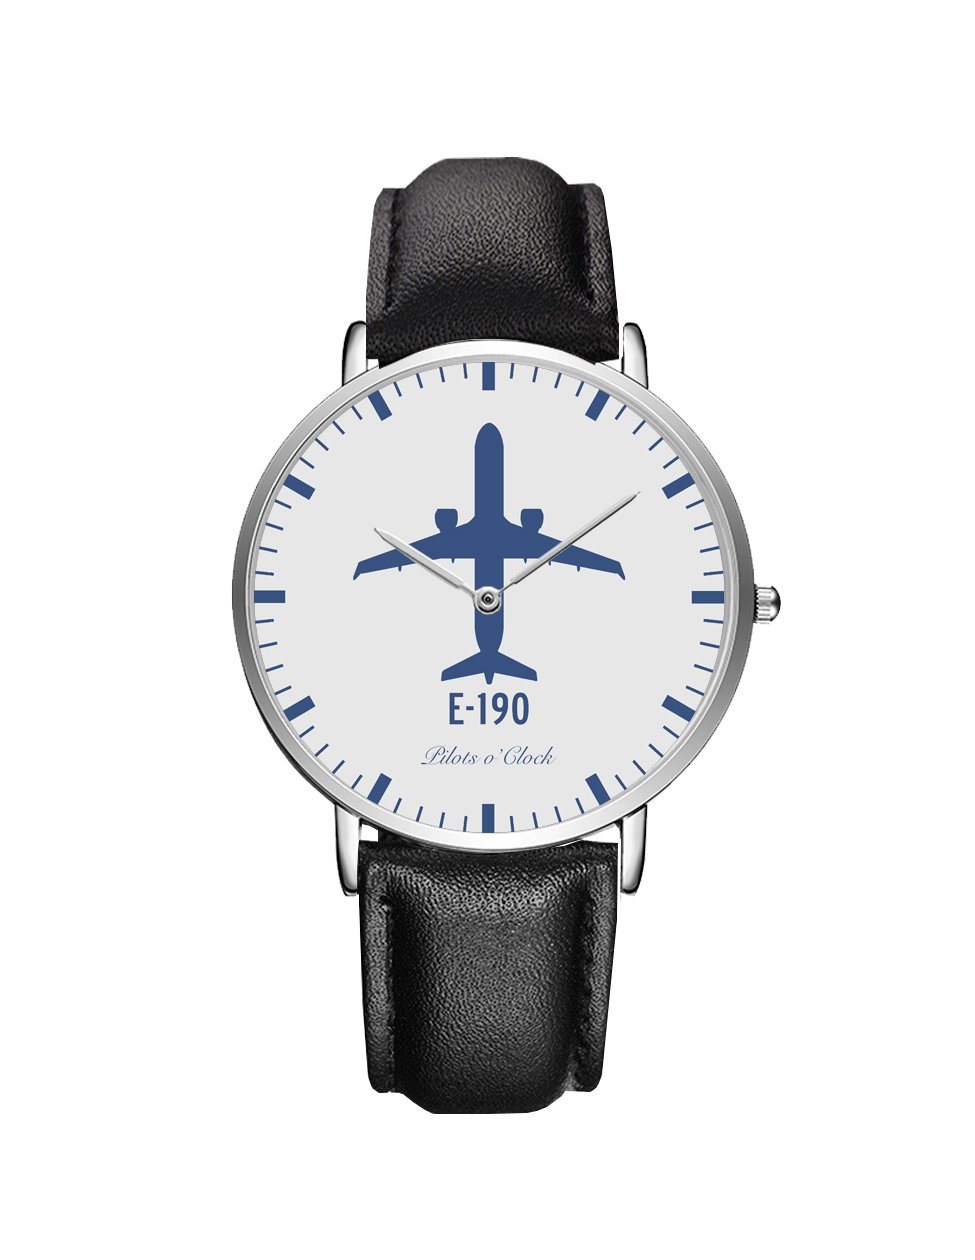 Embraer E190 Leather Strap Watches Pilot Eyes Store Silver & Black Leather Strap 